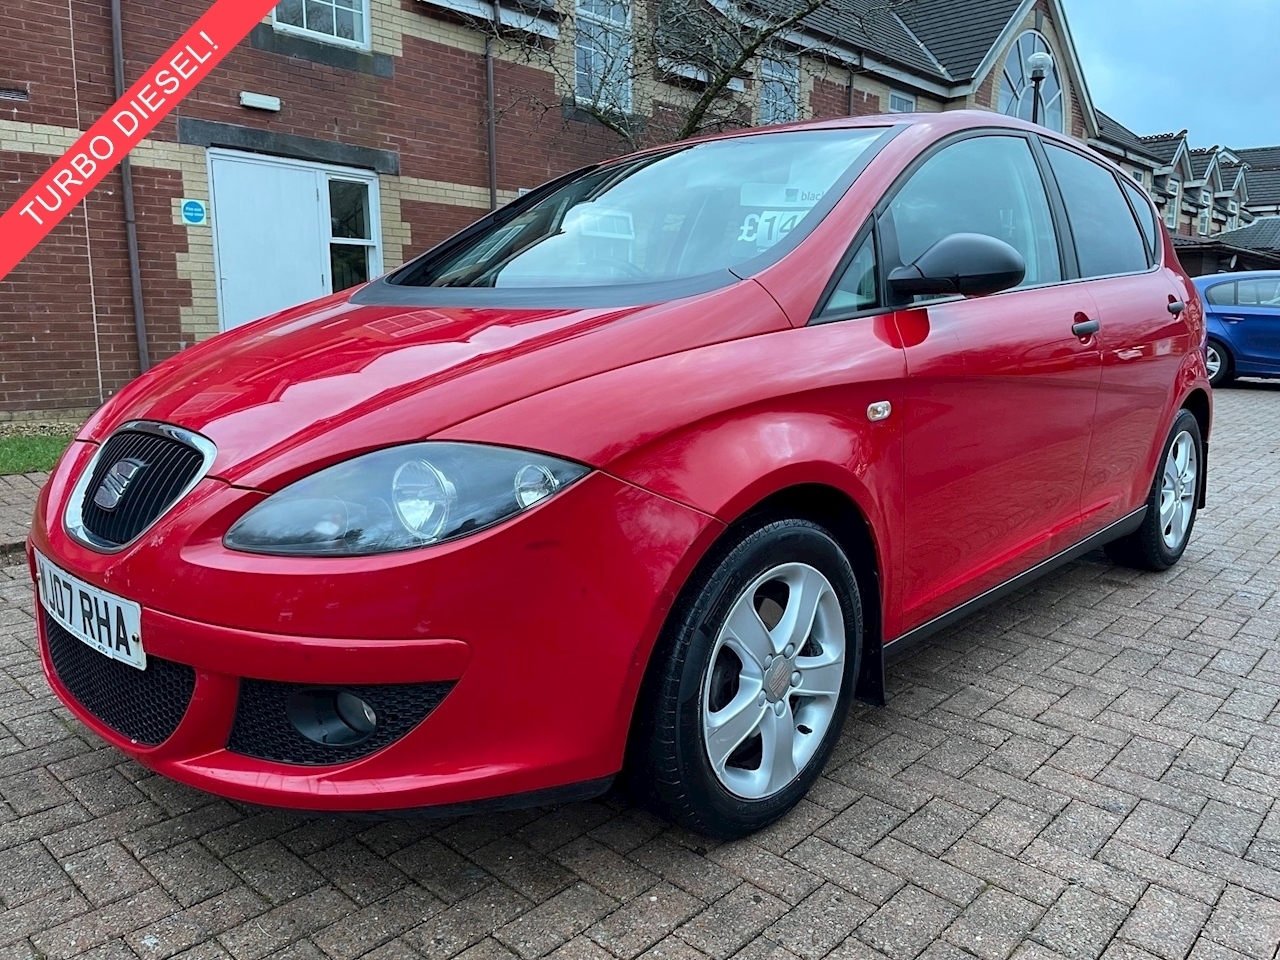 Seat Altea for sale in Acle - Part Exchange Welcome